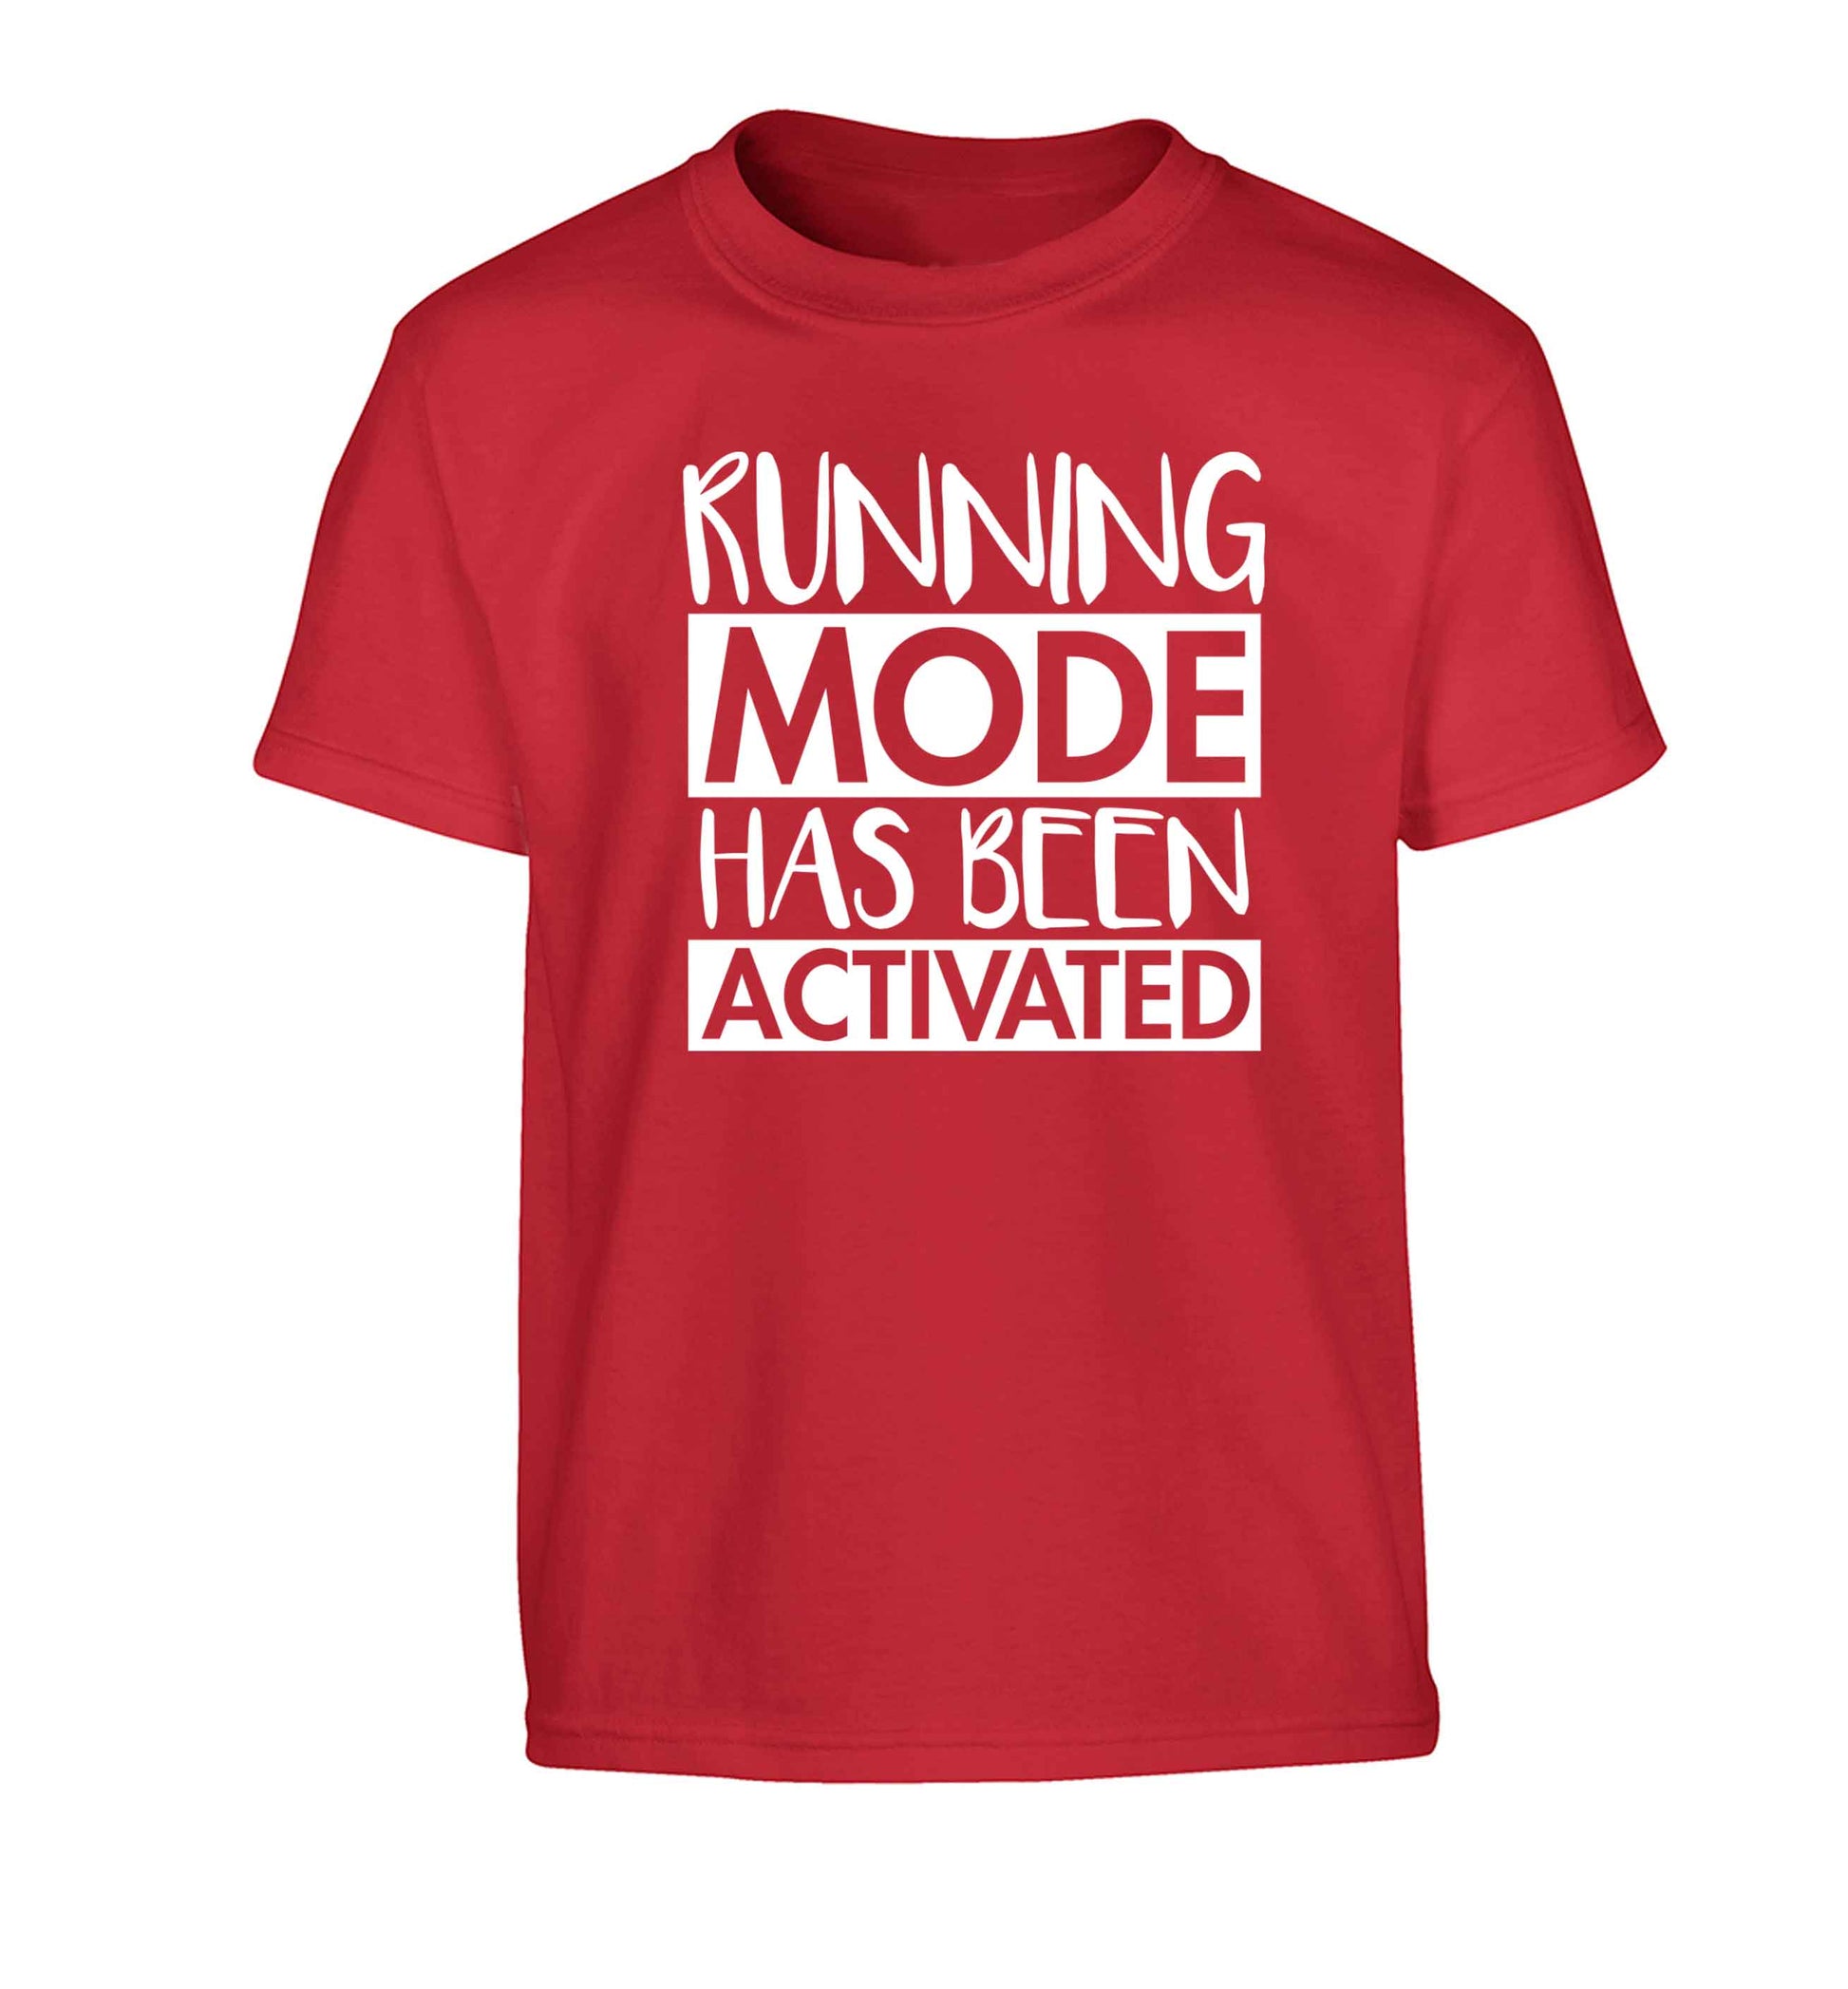 Running mode has been activated Children's red Tshirt 12-13 Years